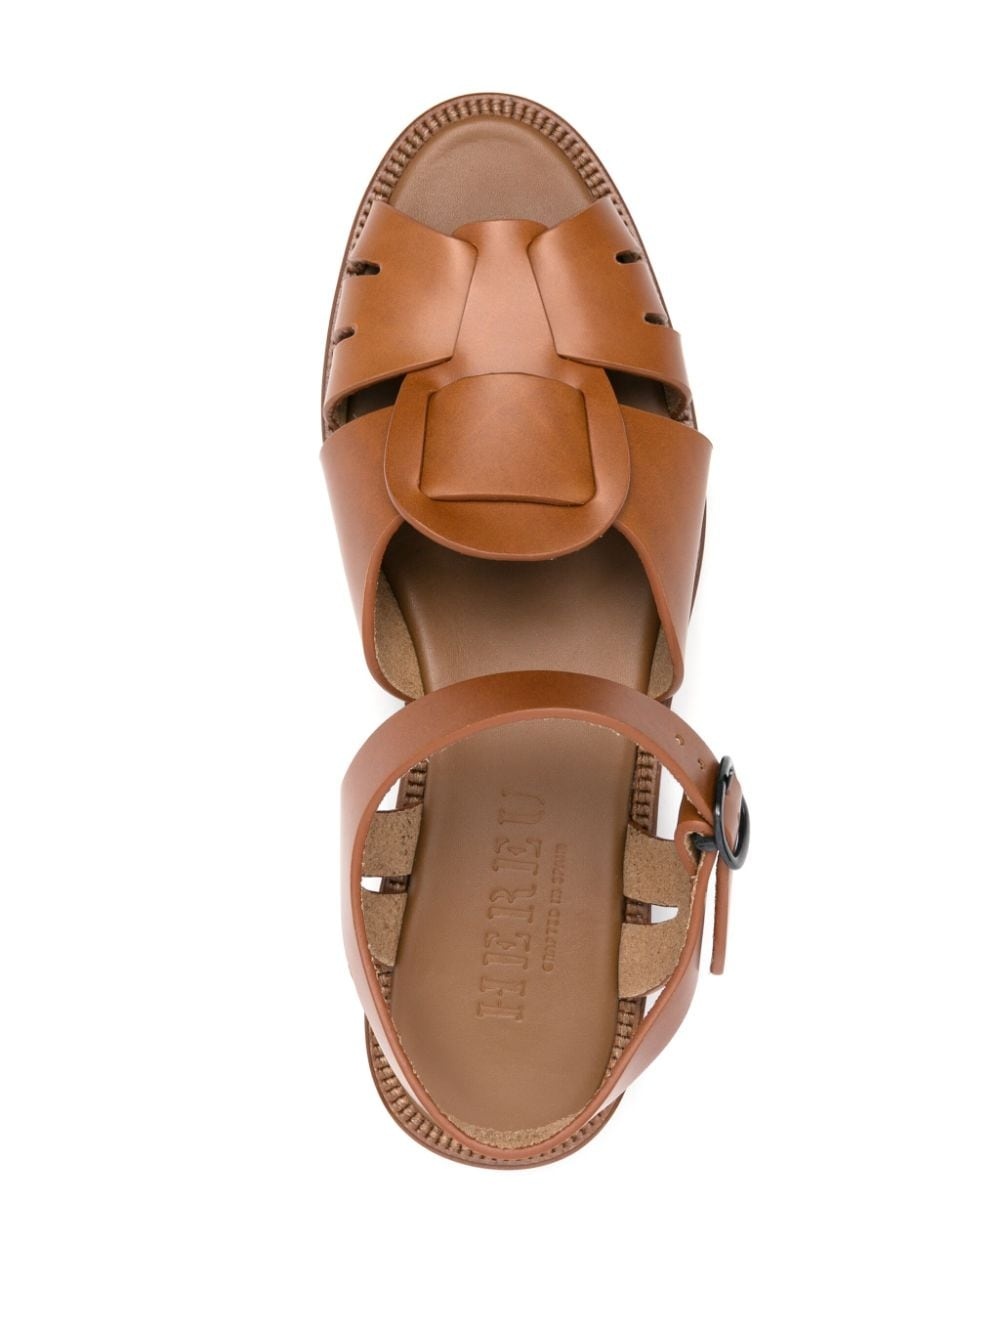 Ancora leather sandals - 4